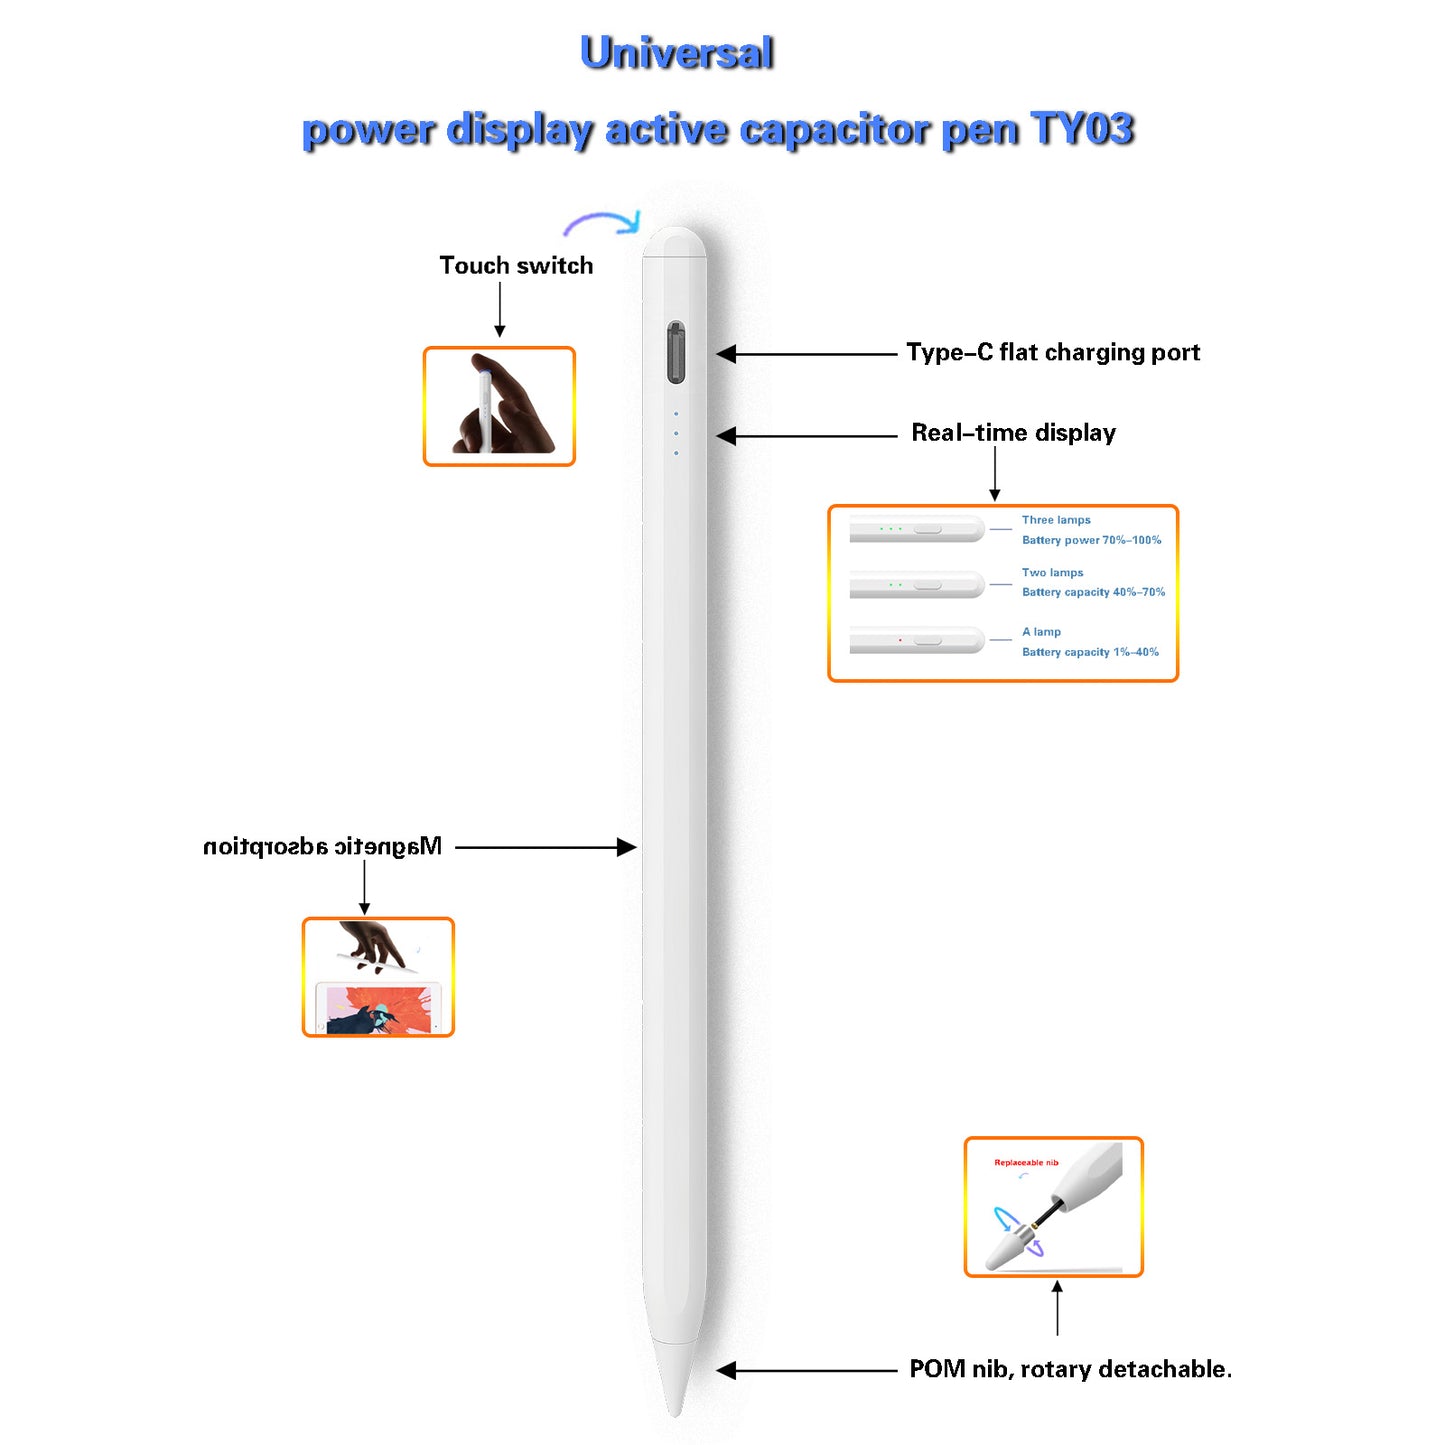 Universal + power display active capacitor pen TY03